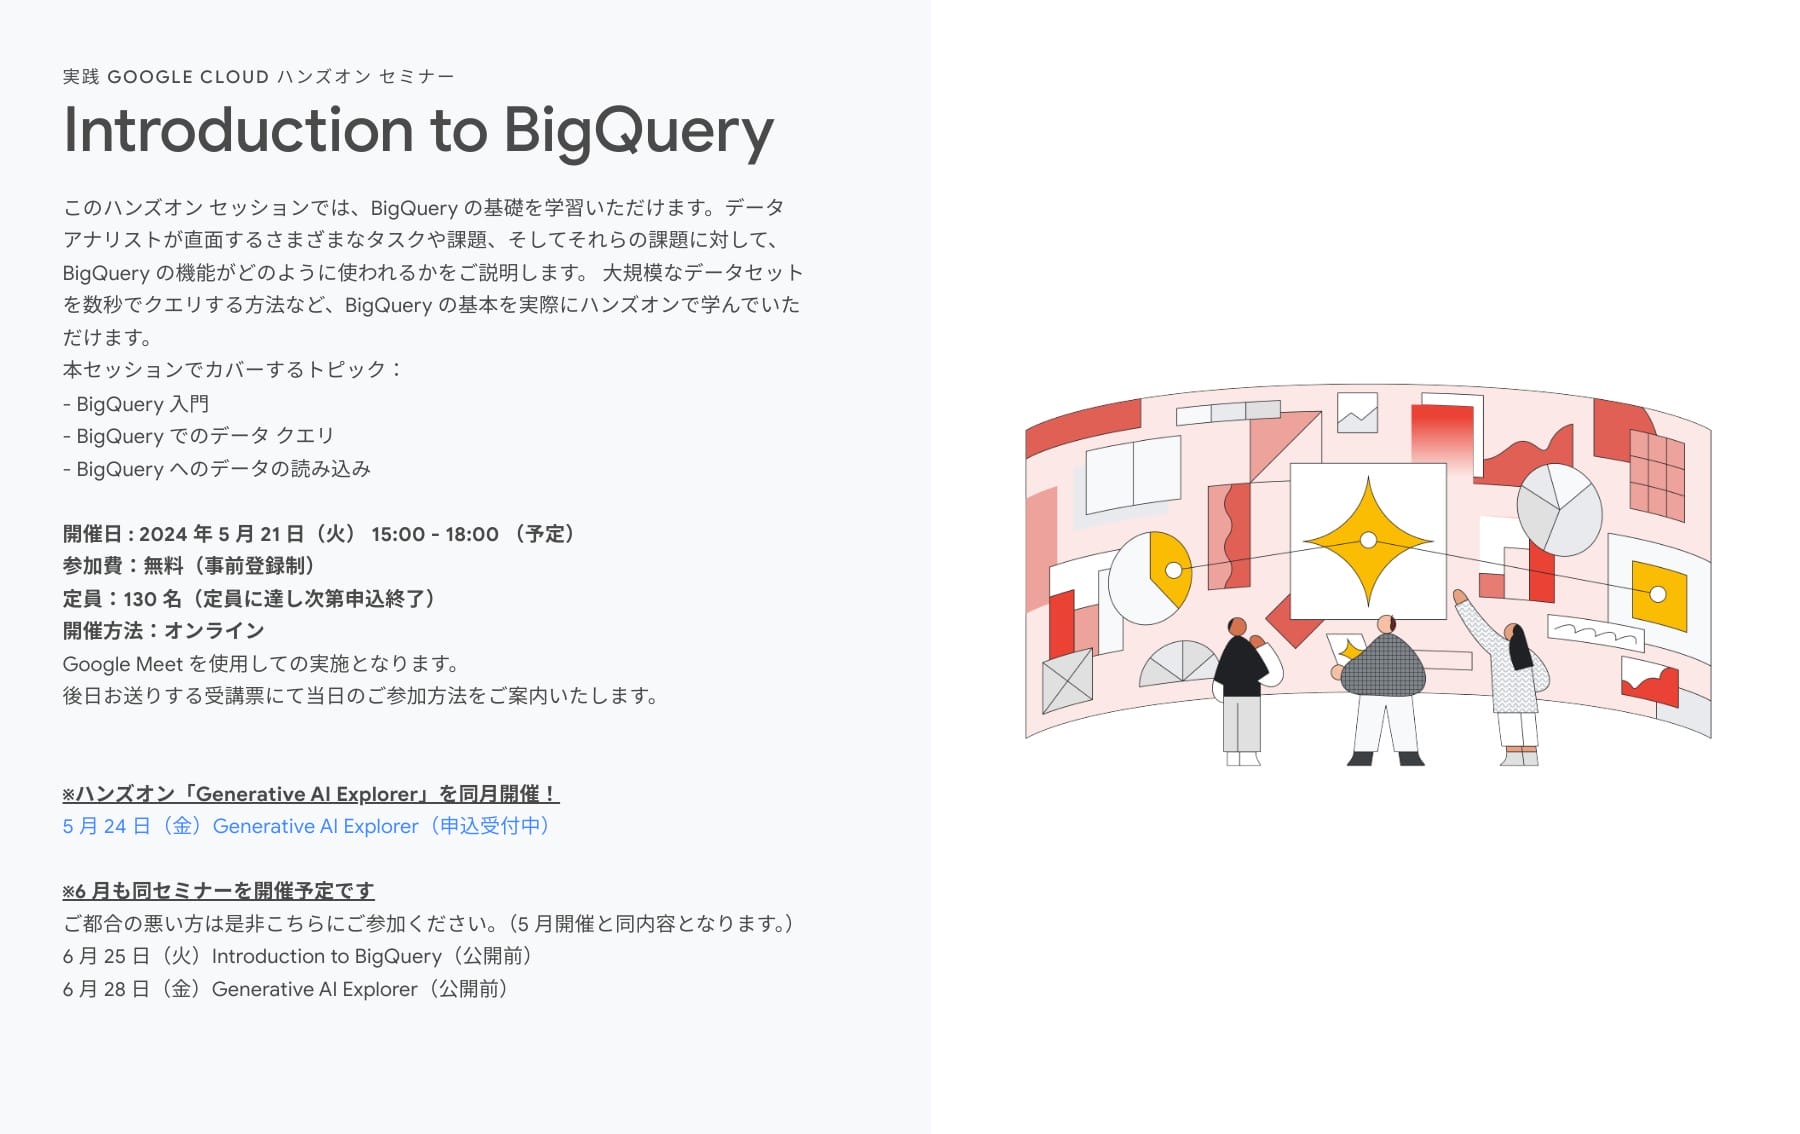 [Google Cloud] Introduction to BigQuery